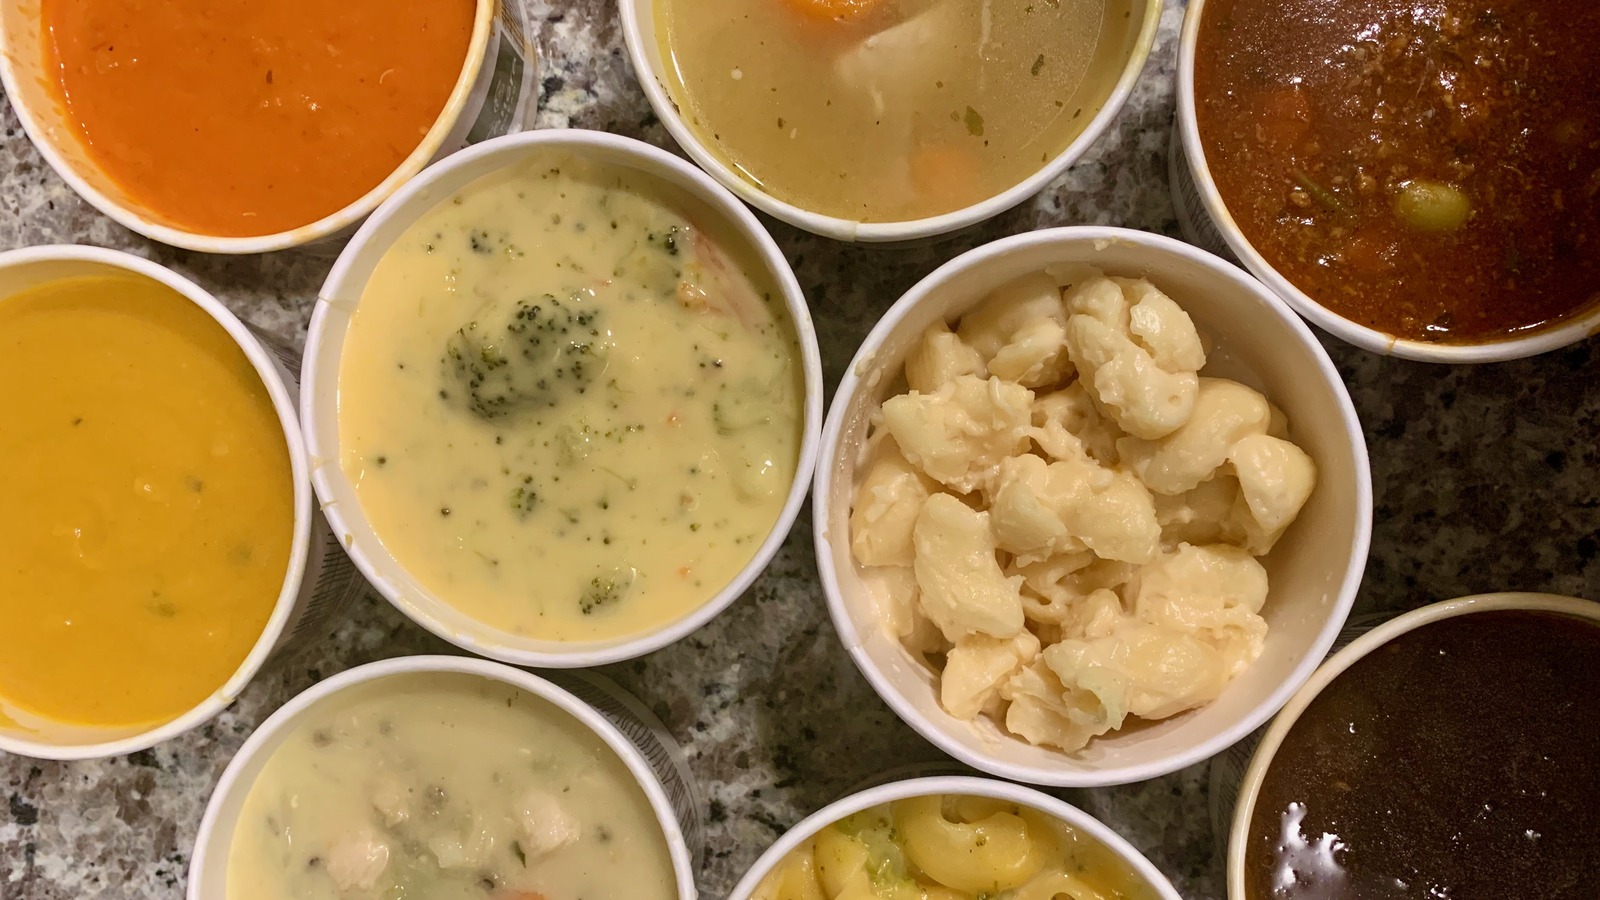 https://www.tastingtable.com/img/gallery/9-soups-and-macs-from-panera-bread-ranked-worst-to-best/l-intro-1668882274.jpg